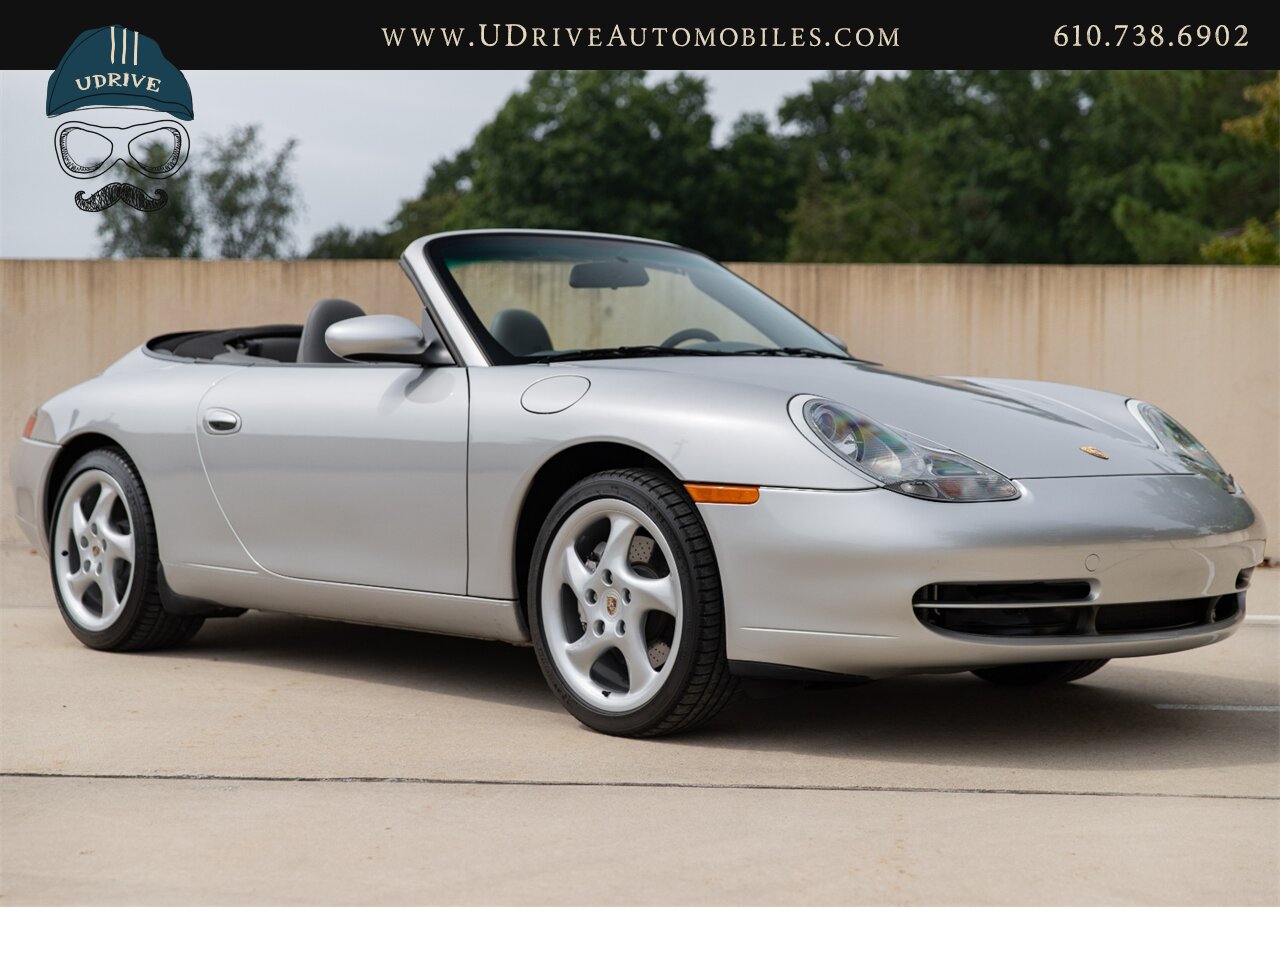 2001 Porsche 911 Carrera 4 Cabriolet Tiptronic IMS Upgrade  Power Seats 18in Turbo Look Wheels 2 Owners $5k Recent Service - Photo 17 - West Chester, PA 19382